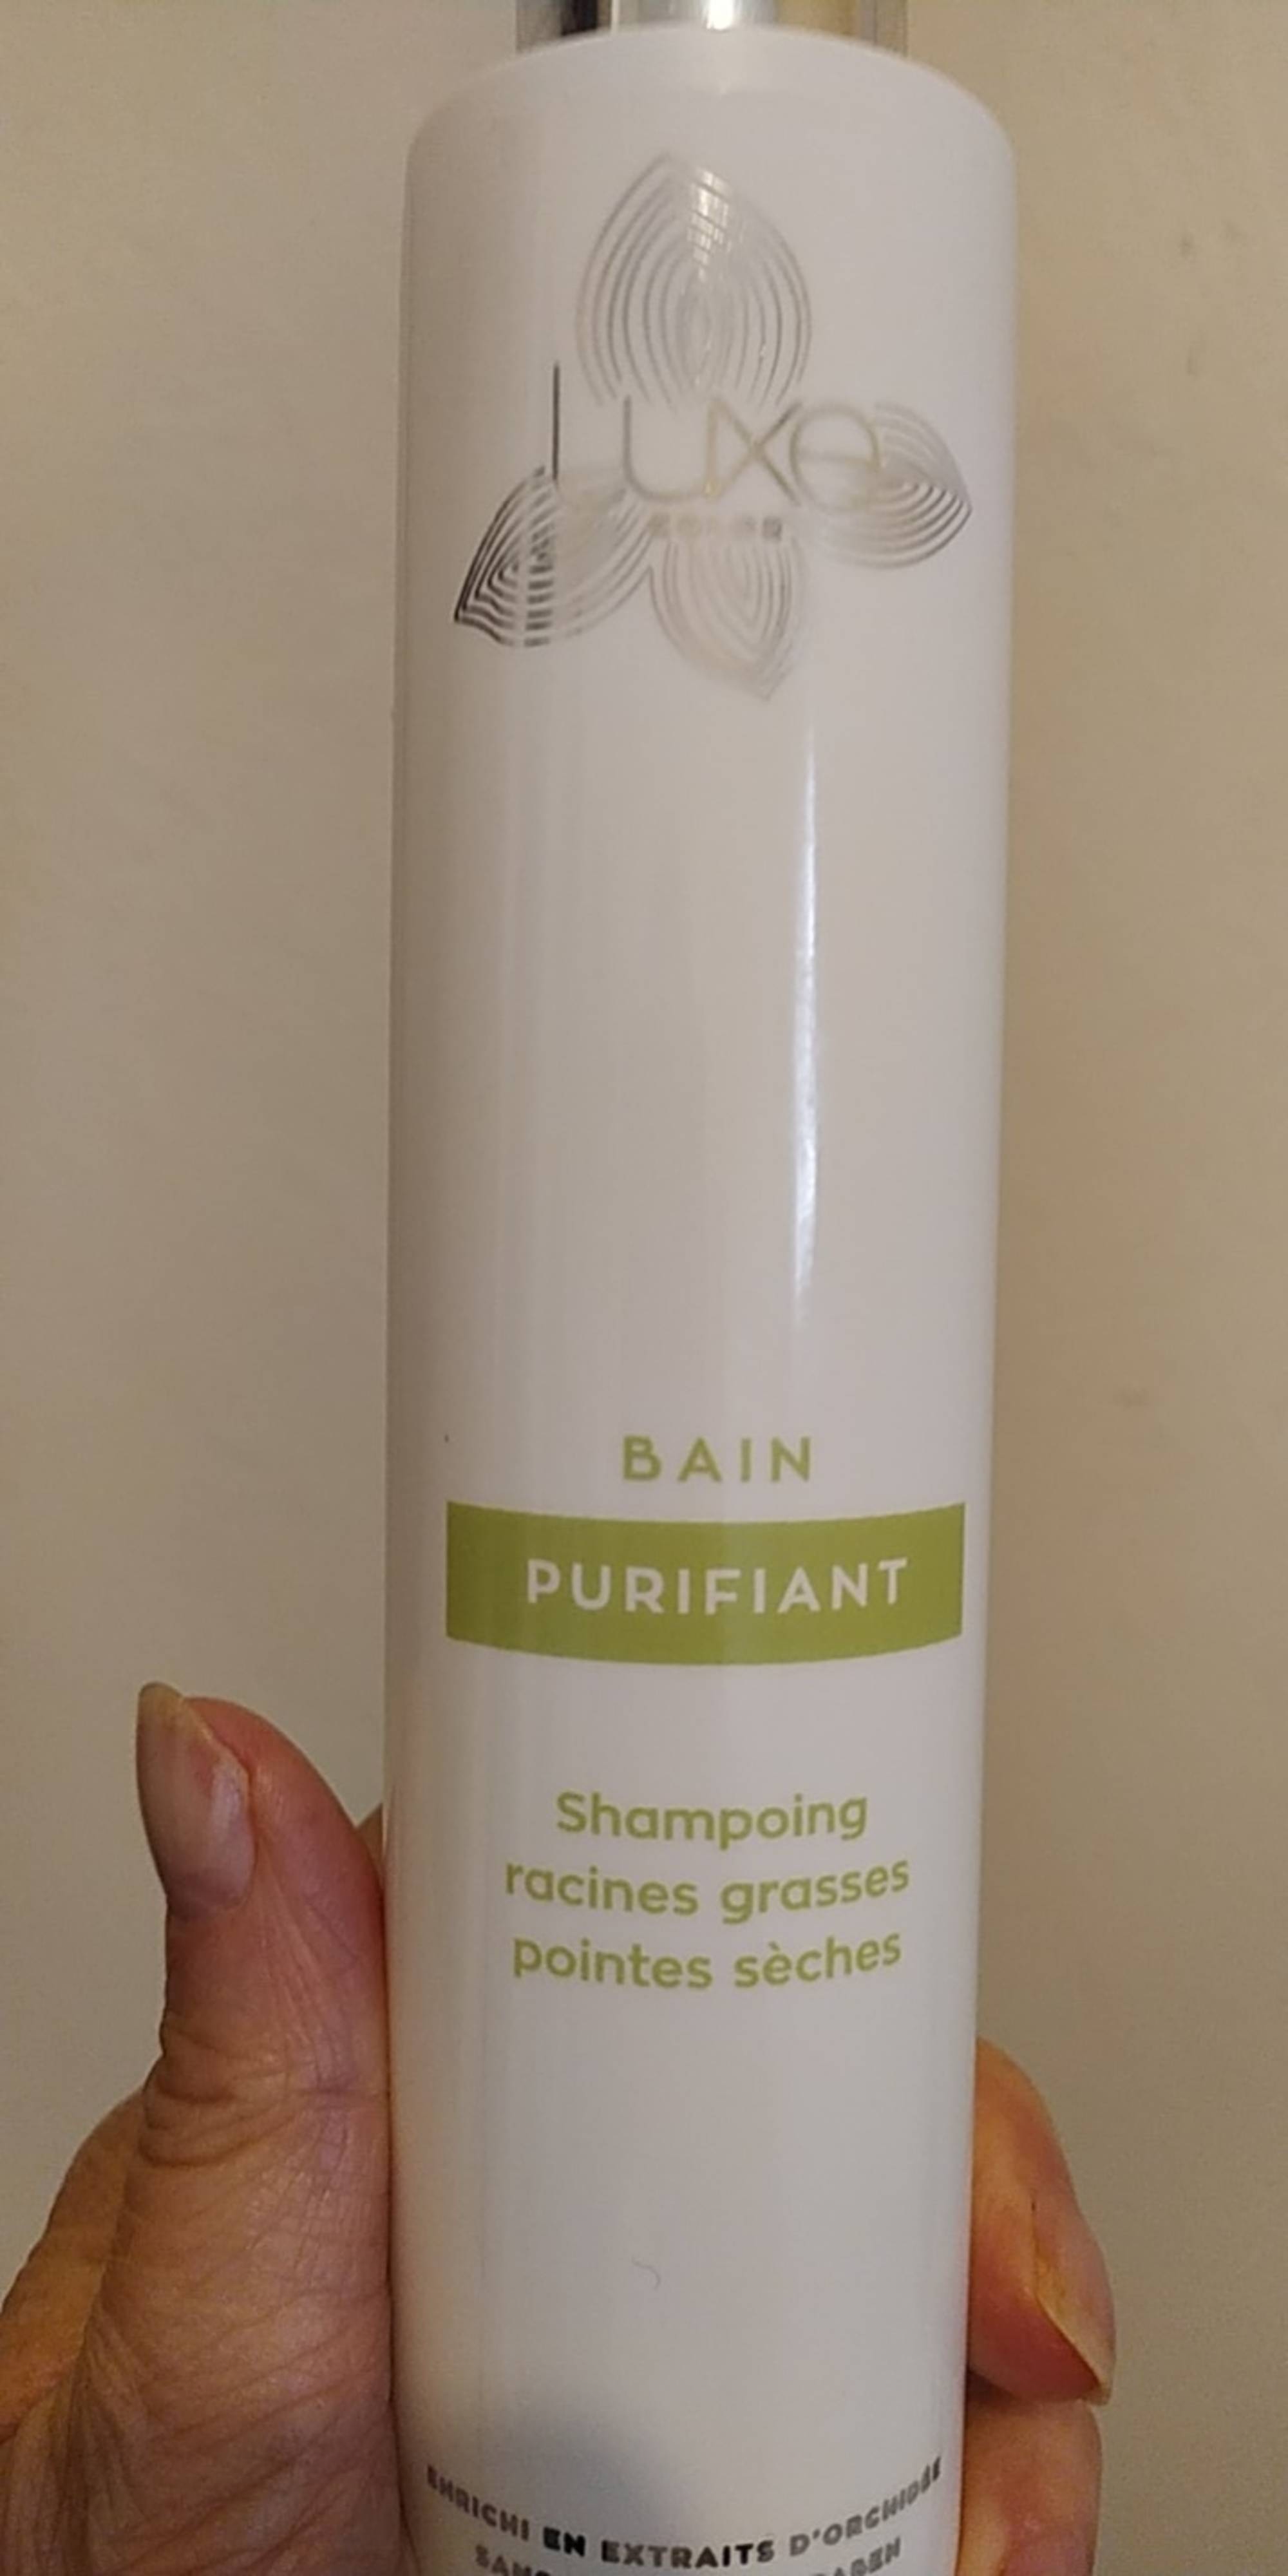 LUXE COLOR - Bain purifiant - Shampoing 